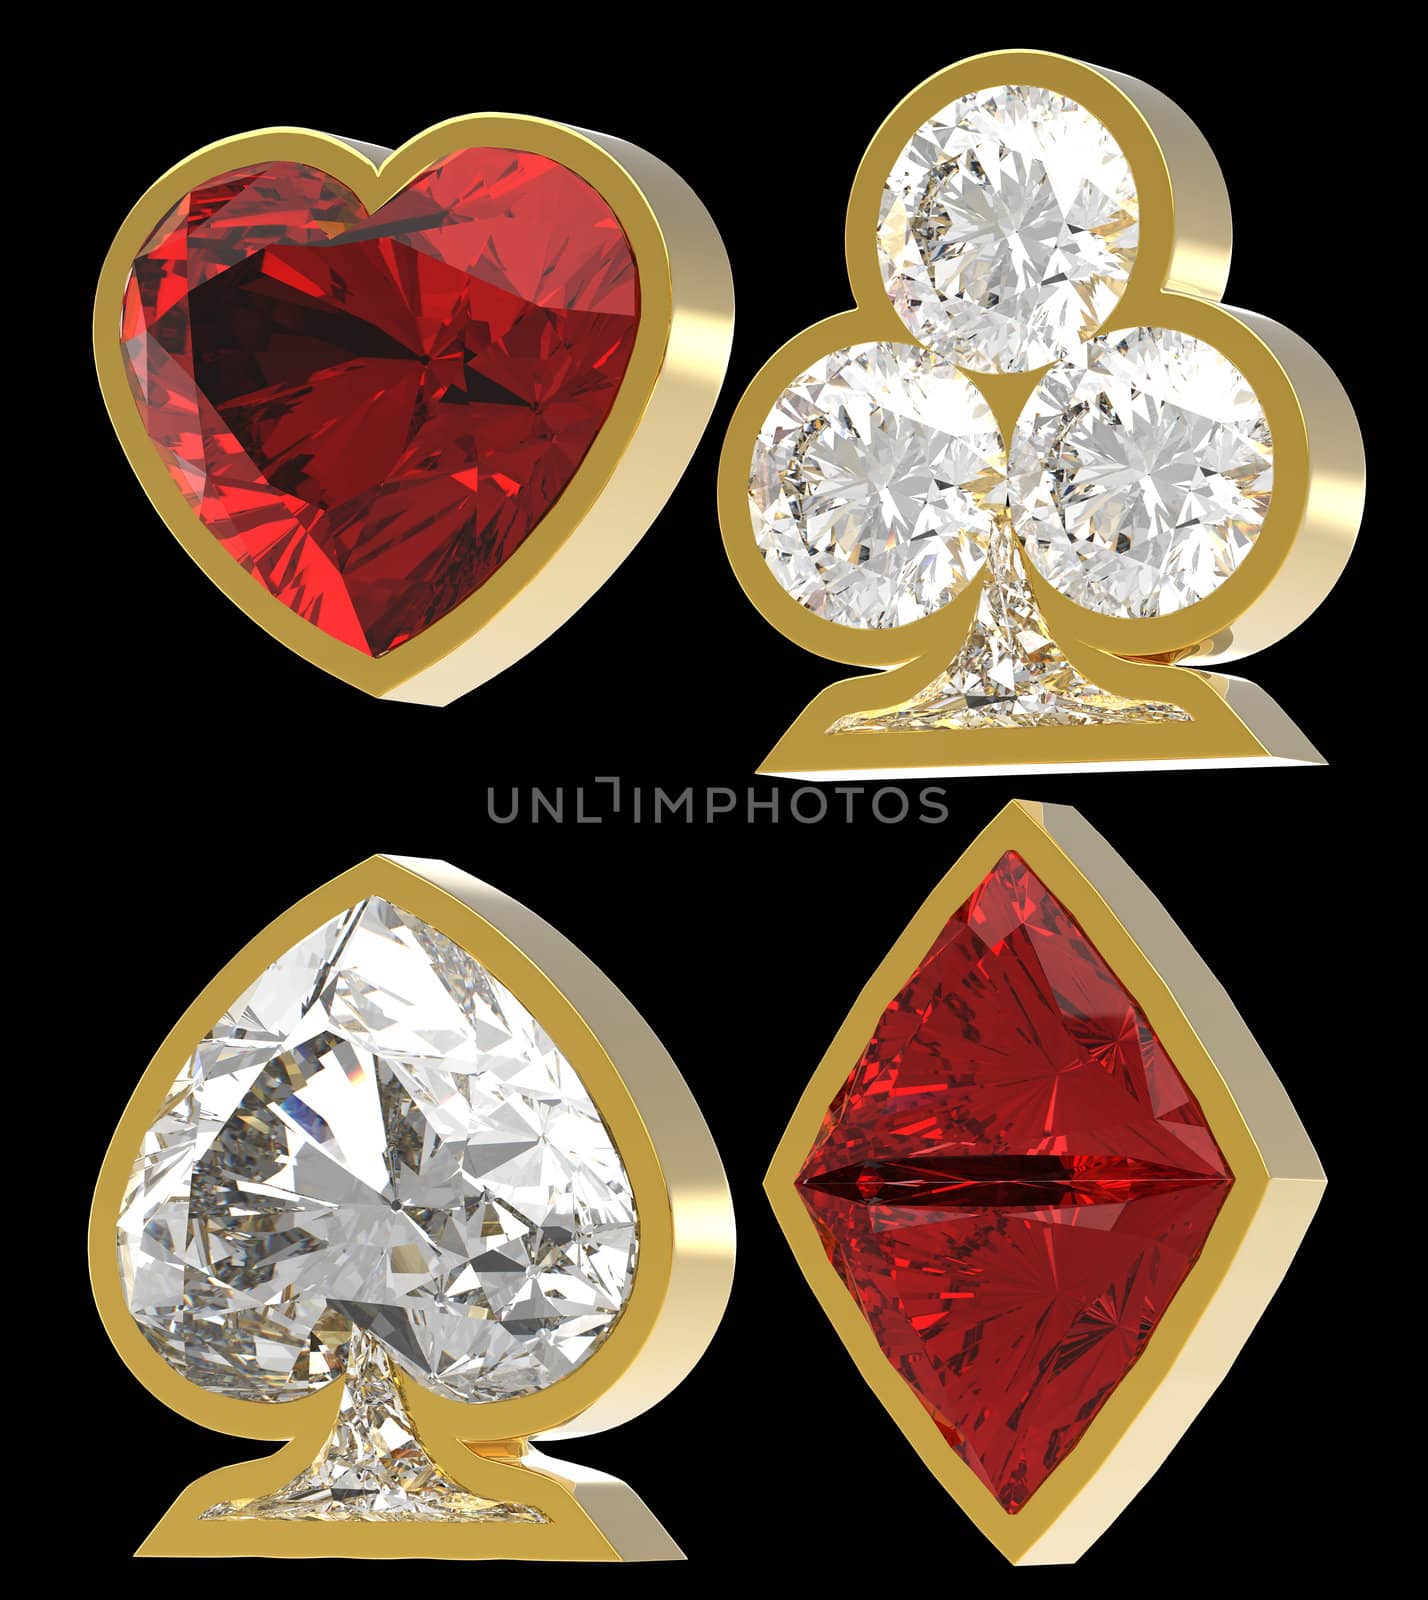 Side view of Diamond shaped Card Suits with golden framing over black background. Other gems are in my portfolio.